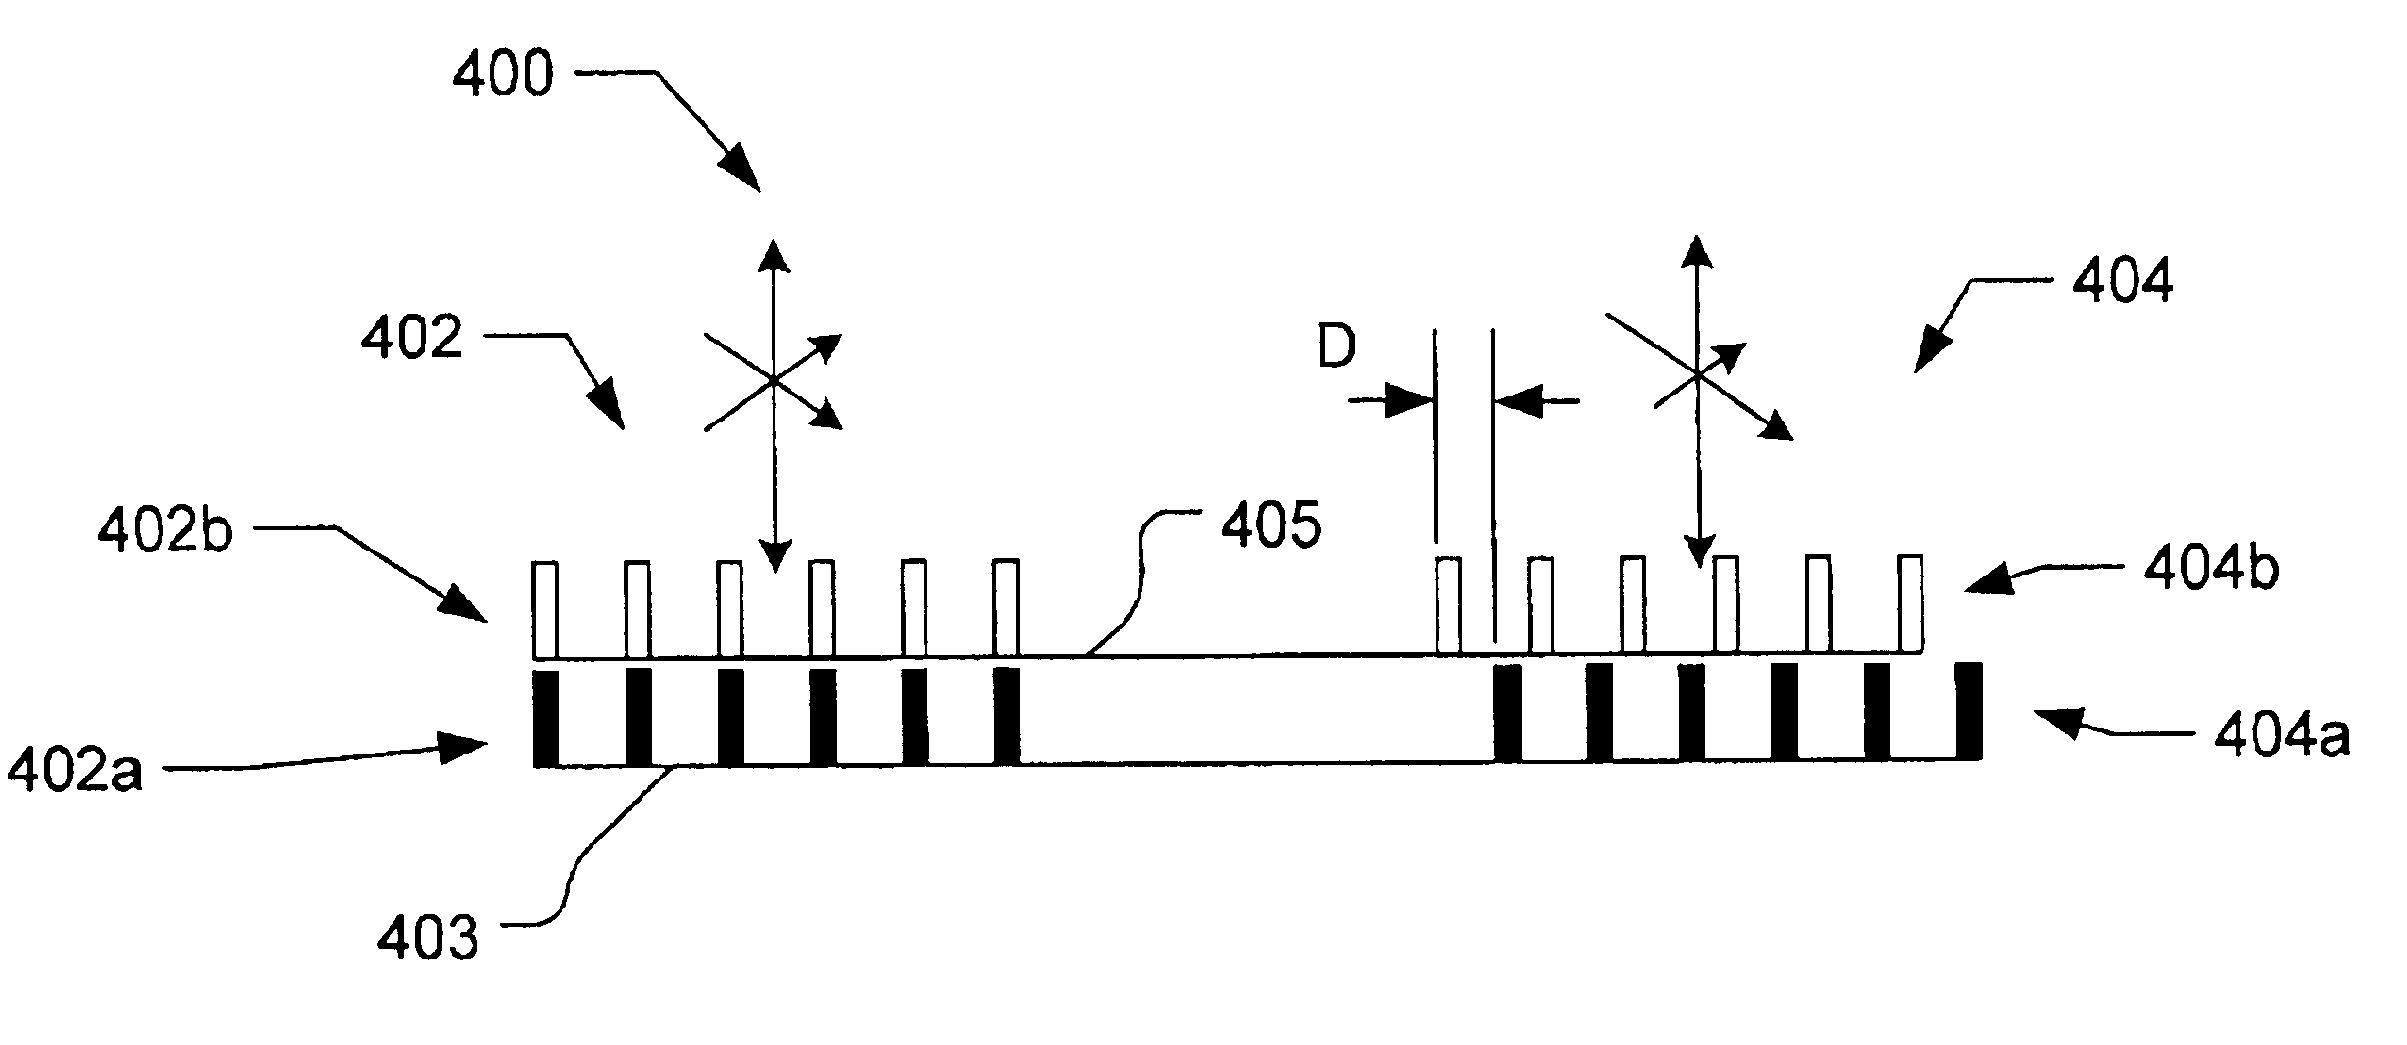 Measuring an alignment target with multiple polarization states